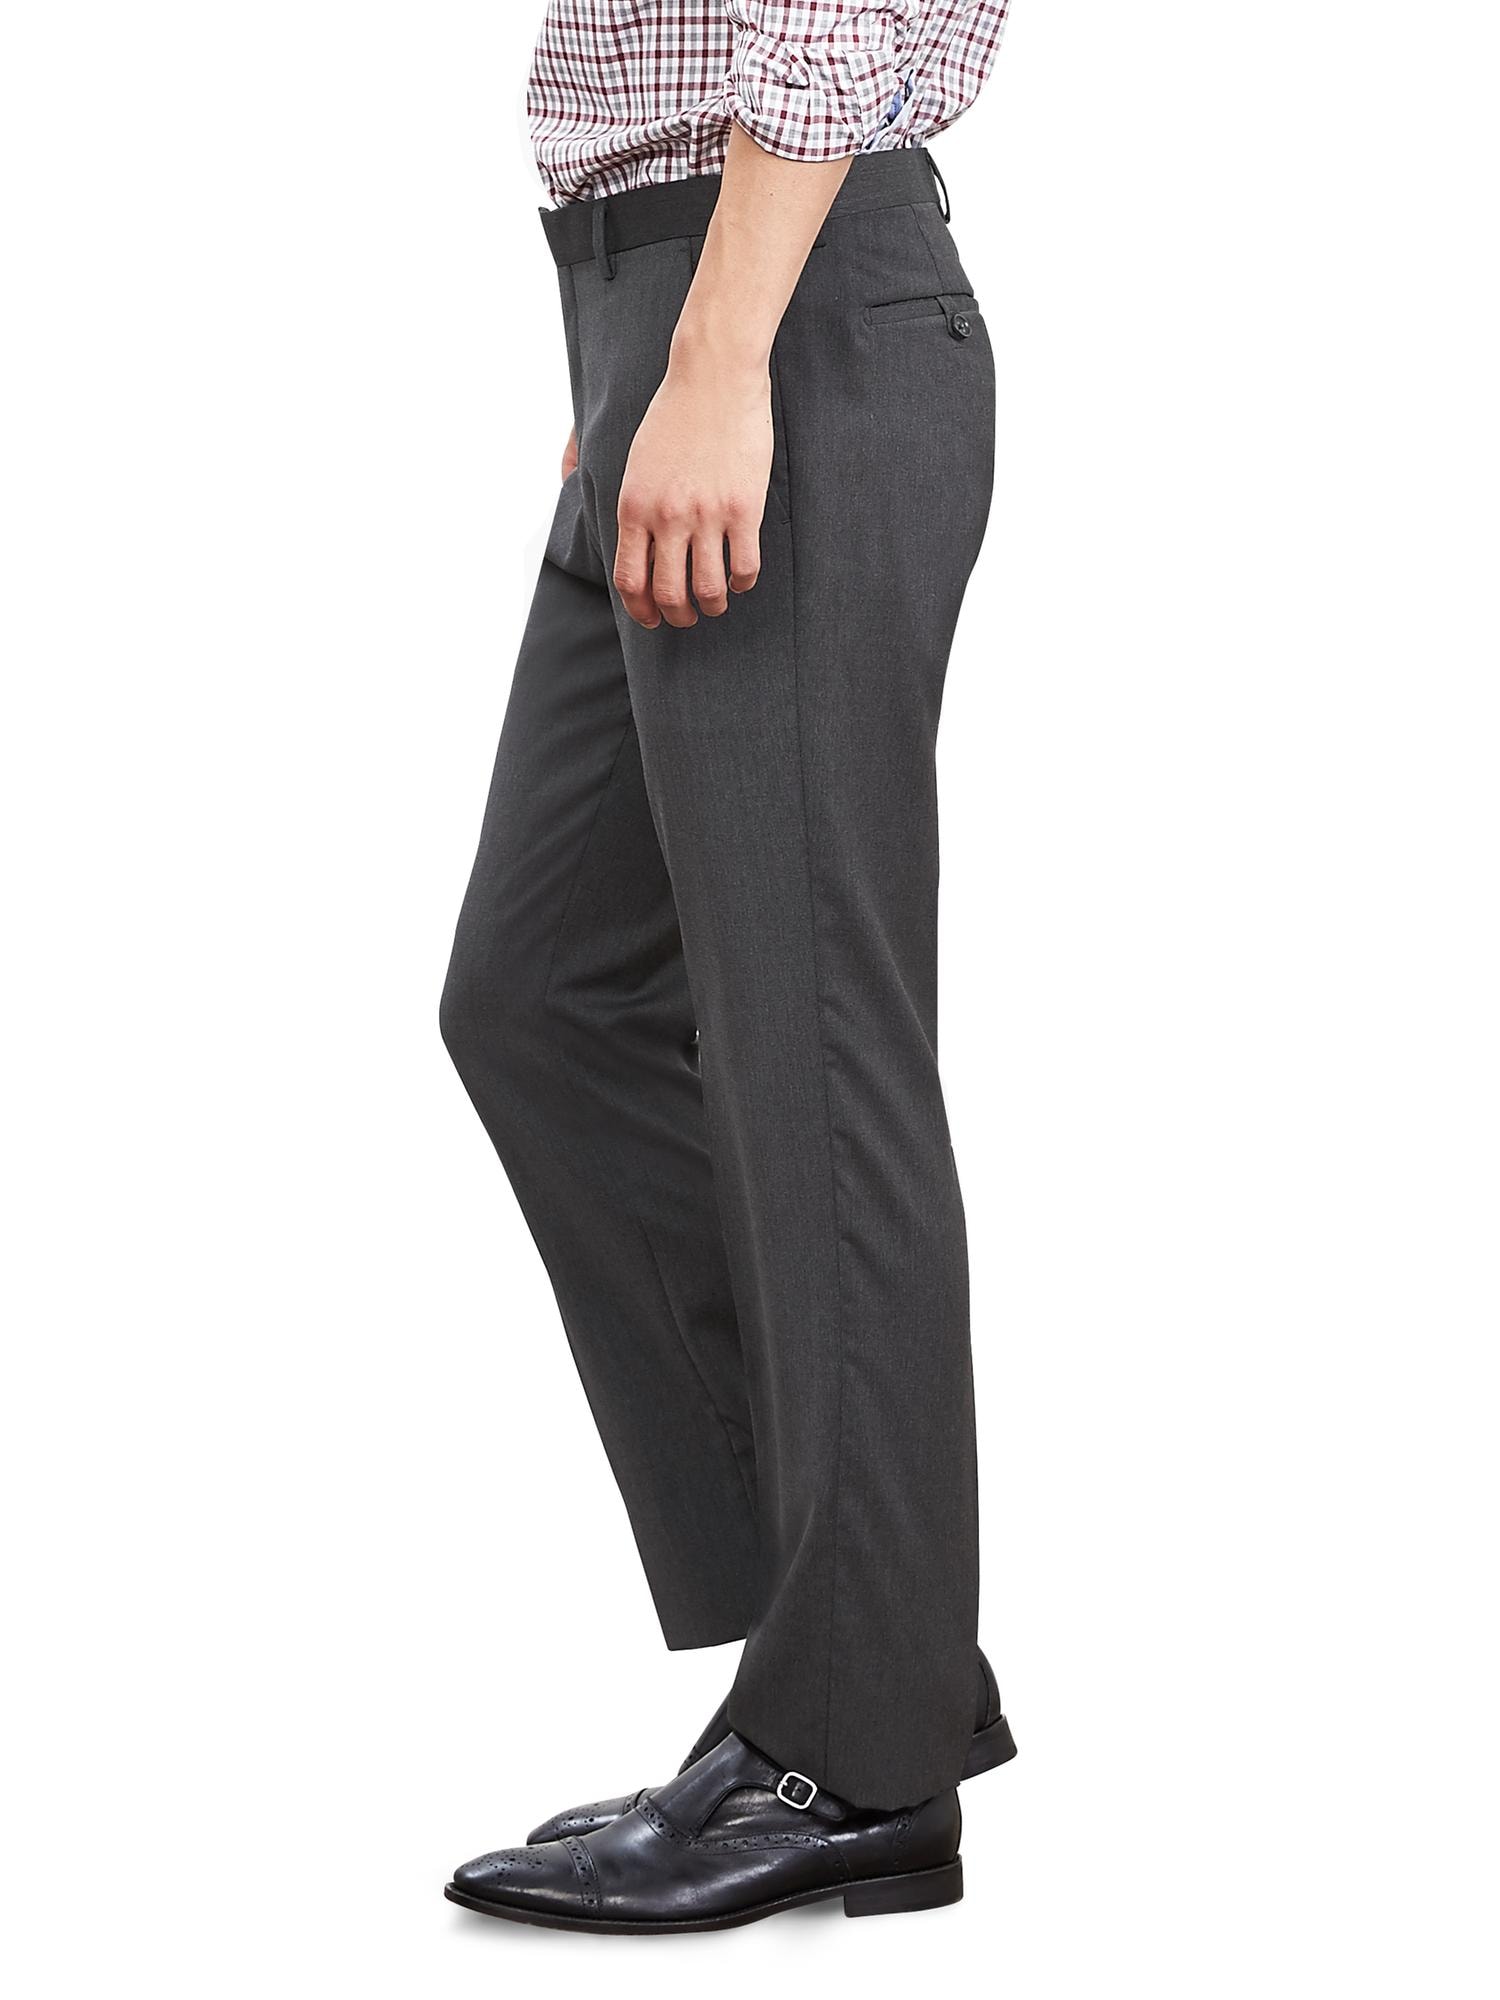 Tailored Slim Charcoal Italian Wool Suit Trouser